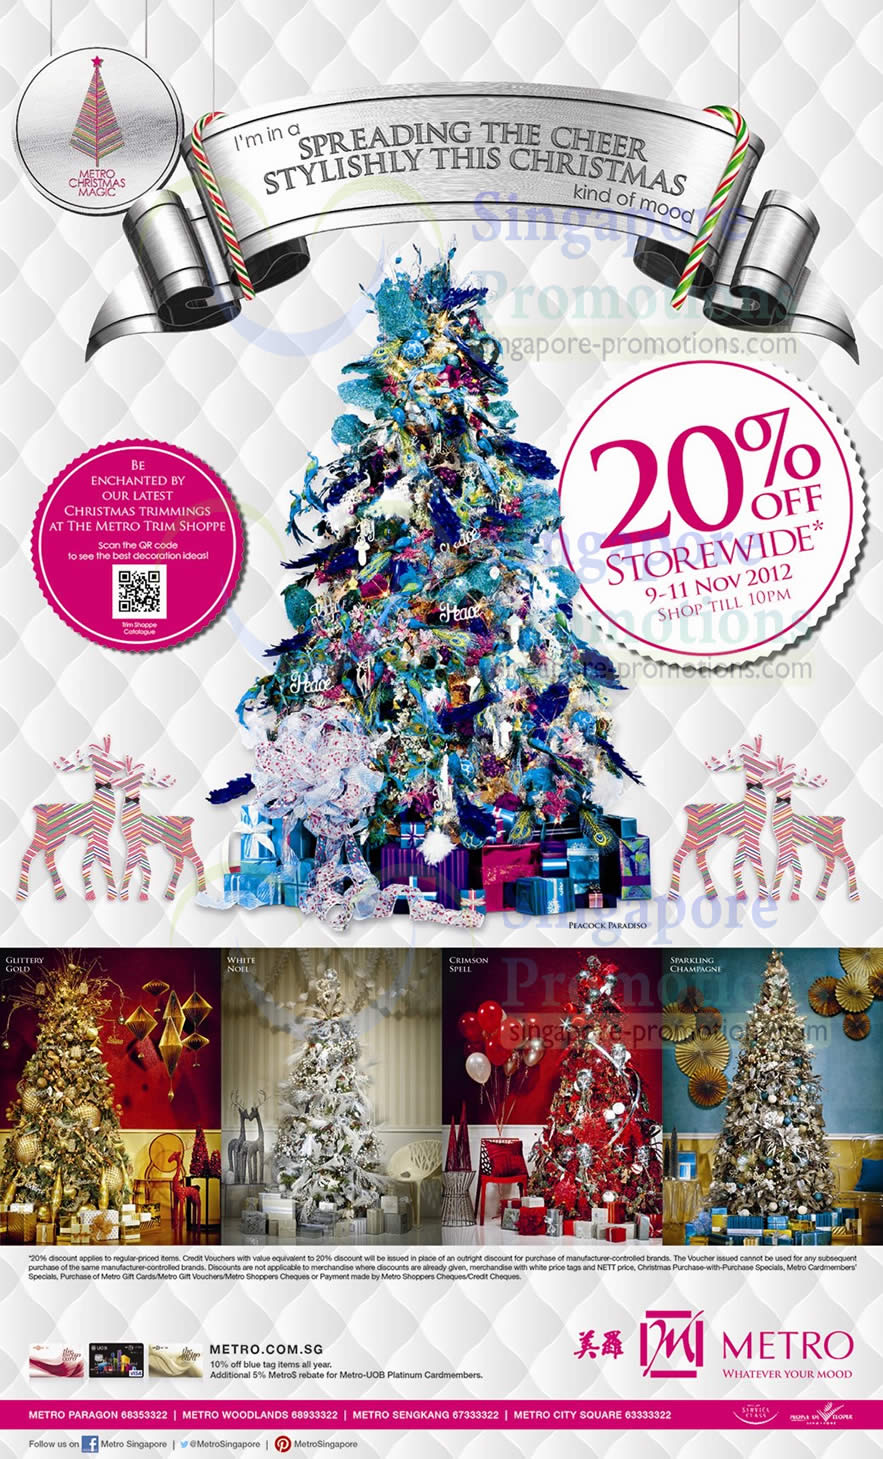 Featured image for Metro 20% Off Storewide Promotion 9 - 11 Nov 2012